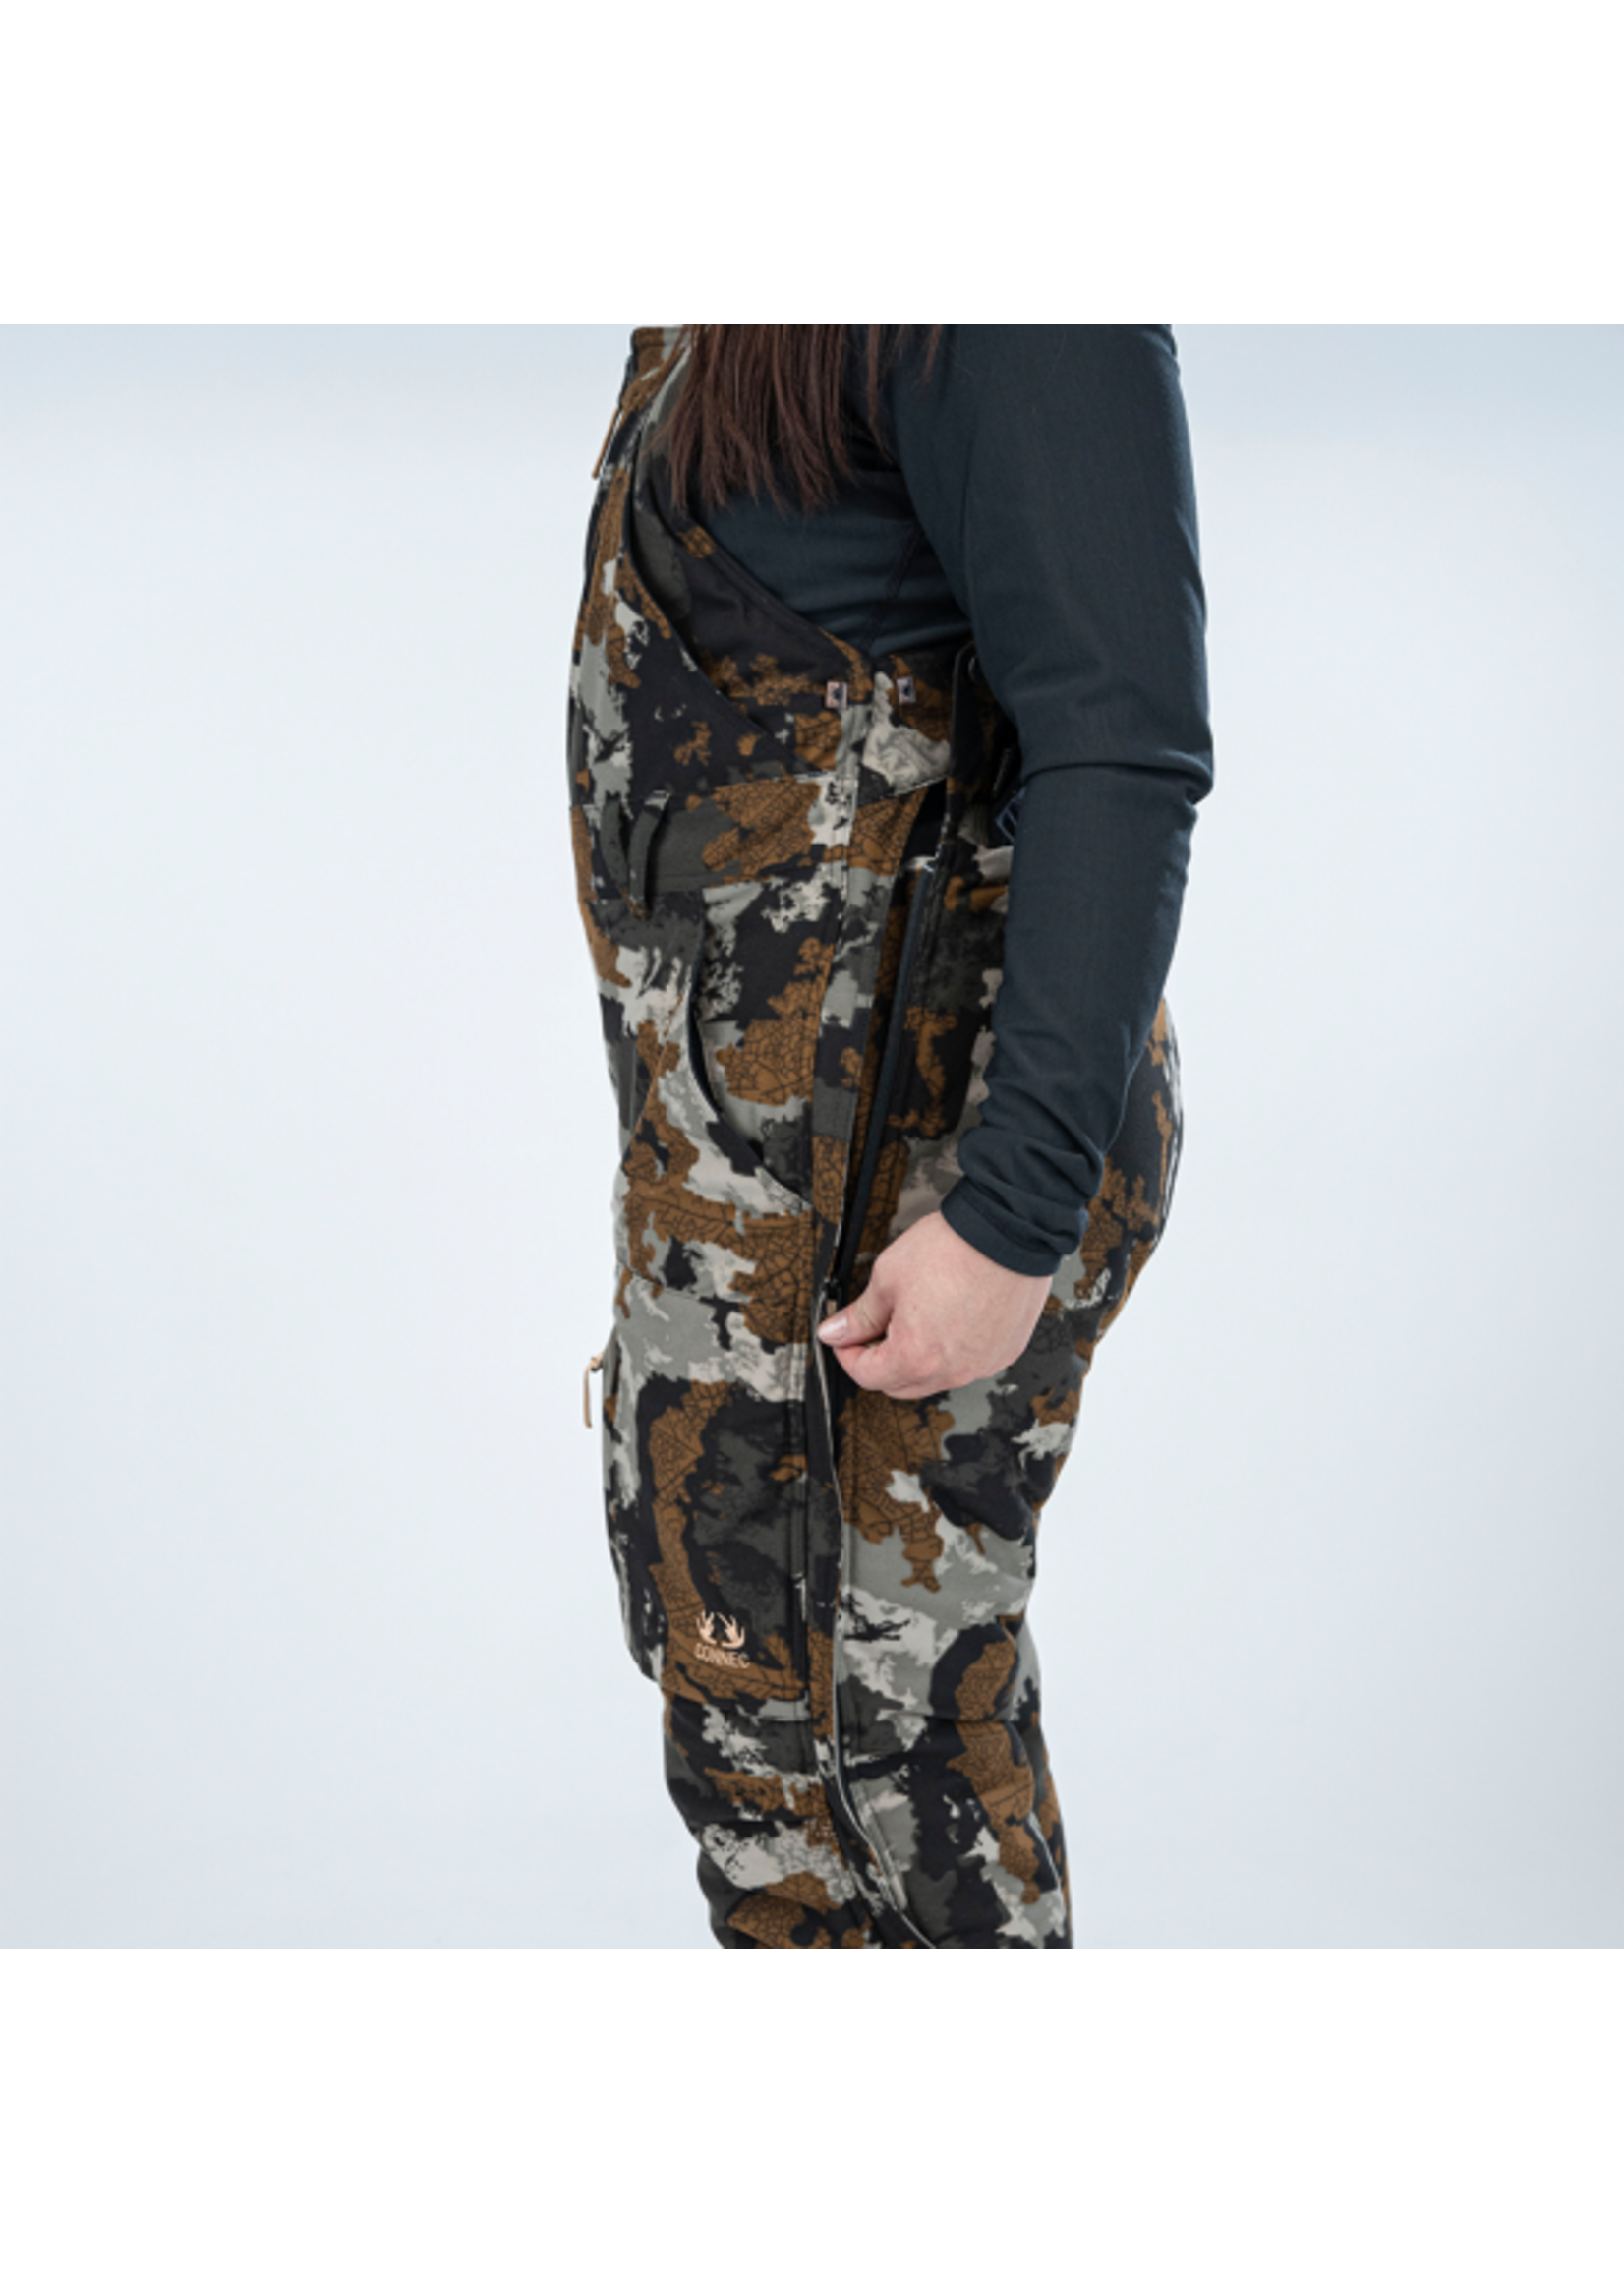 Connec Outdoor women's infusion pants